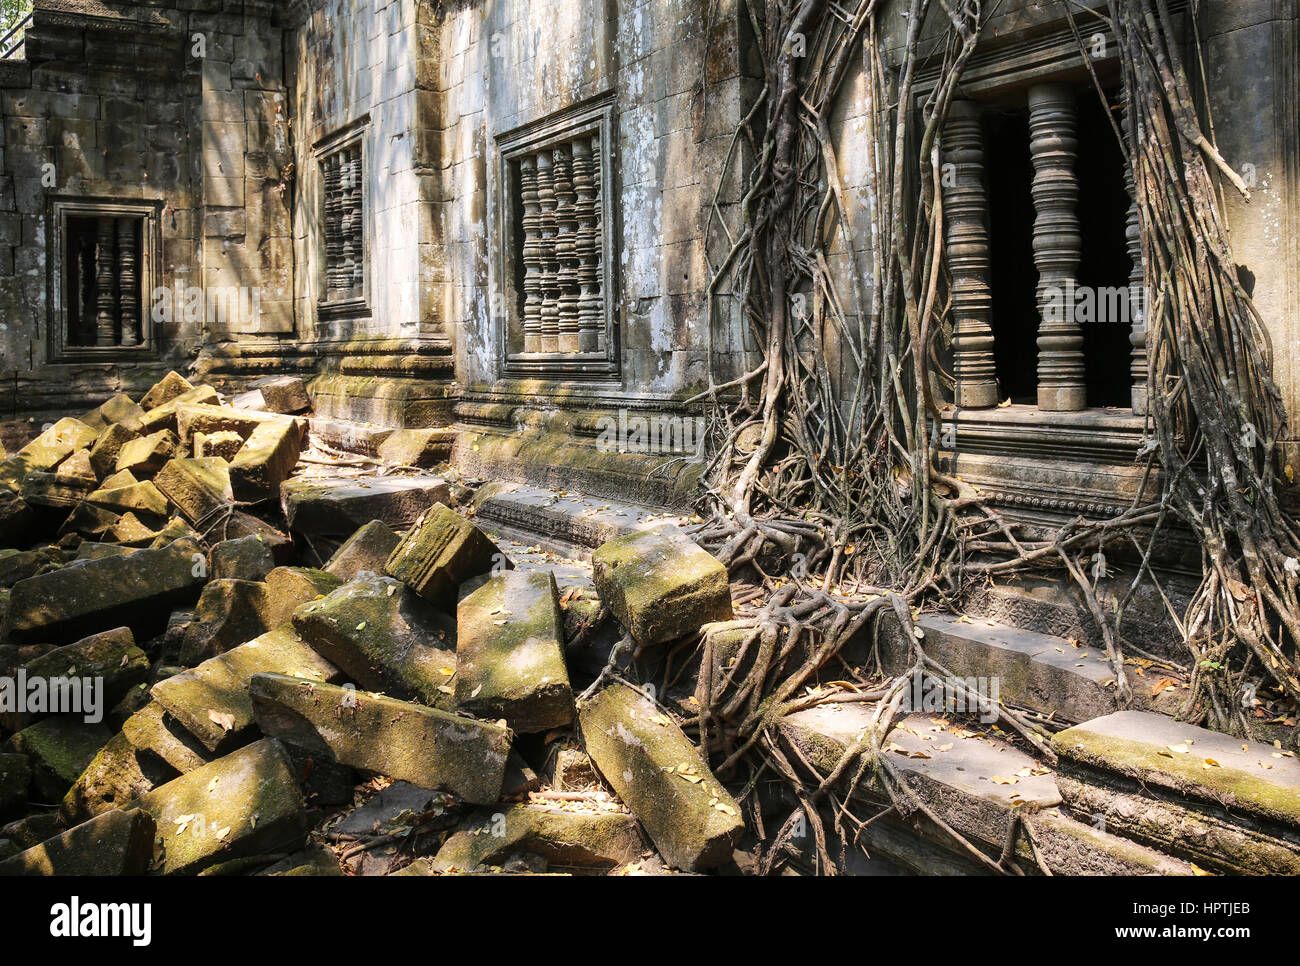 Cambodge, Angkor, Beng Mealea Temple Banque D'Images